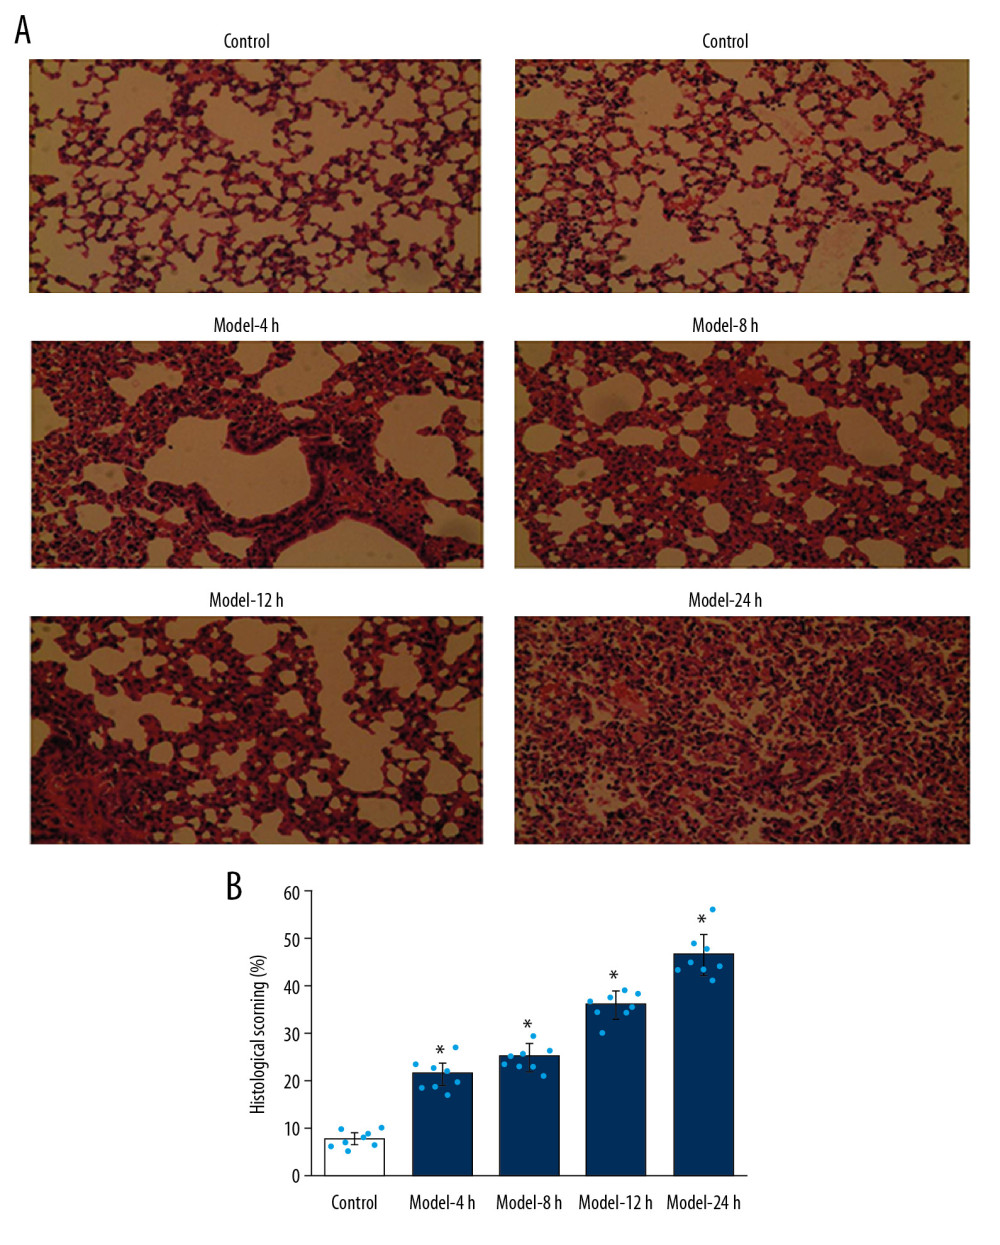 Pathological changes of inflammations in lung tissues for the ALI mouse models in different groups according to HE staining. (A) HE staining images. (B) Statistical analysis of histological scores for HE-stained images. Magnification, 100×. * p<0.05 vs. Control group.